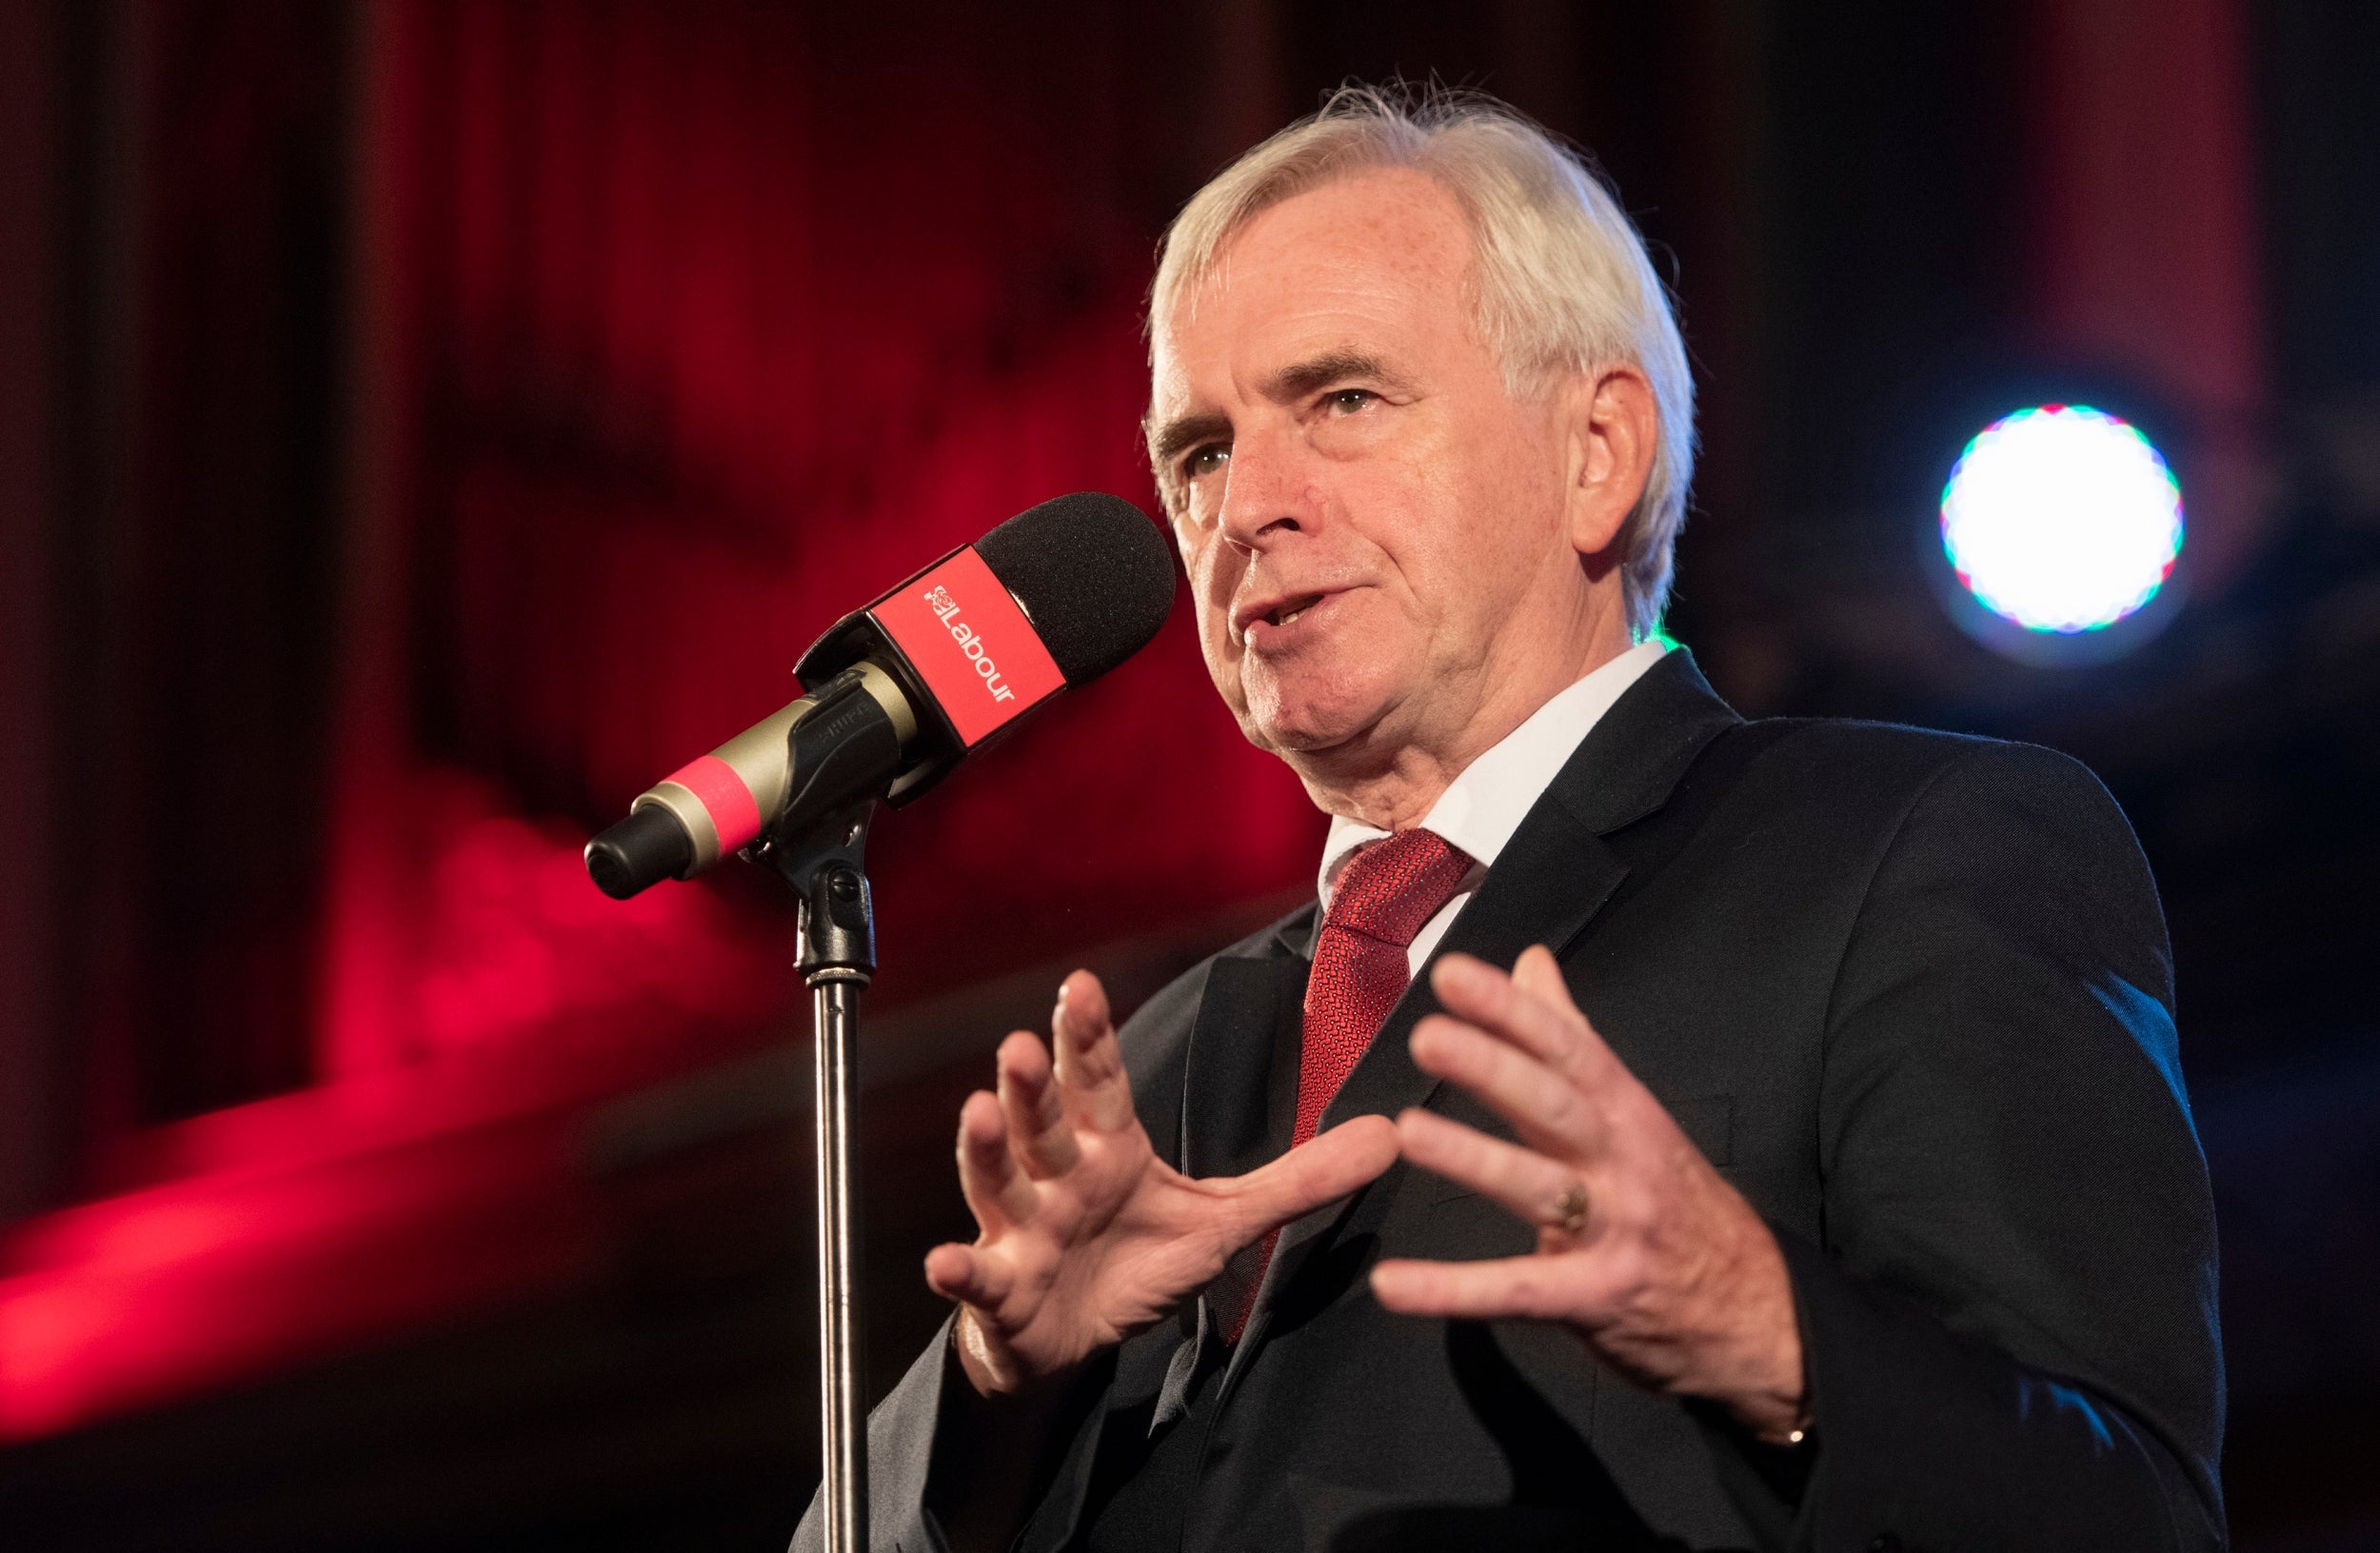 'I am always up for an election whenever it comes – and I have got my winter coat ready' - John McDonnell